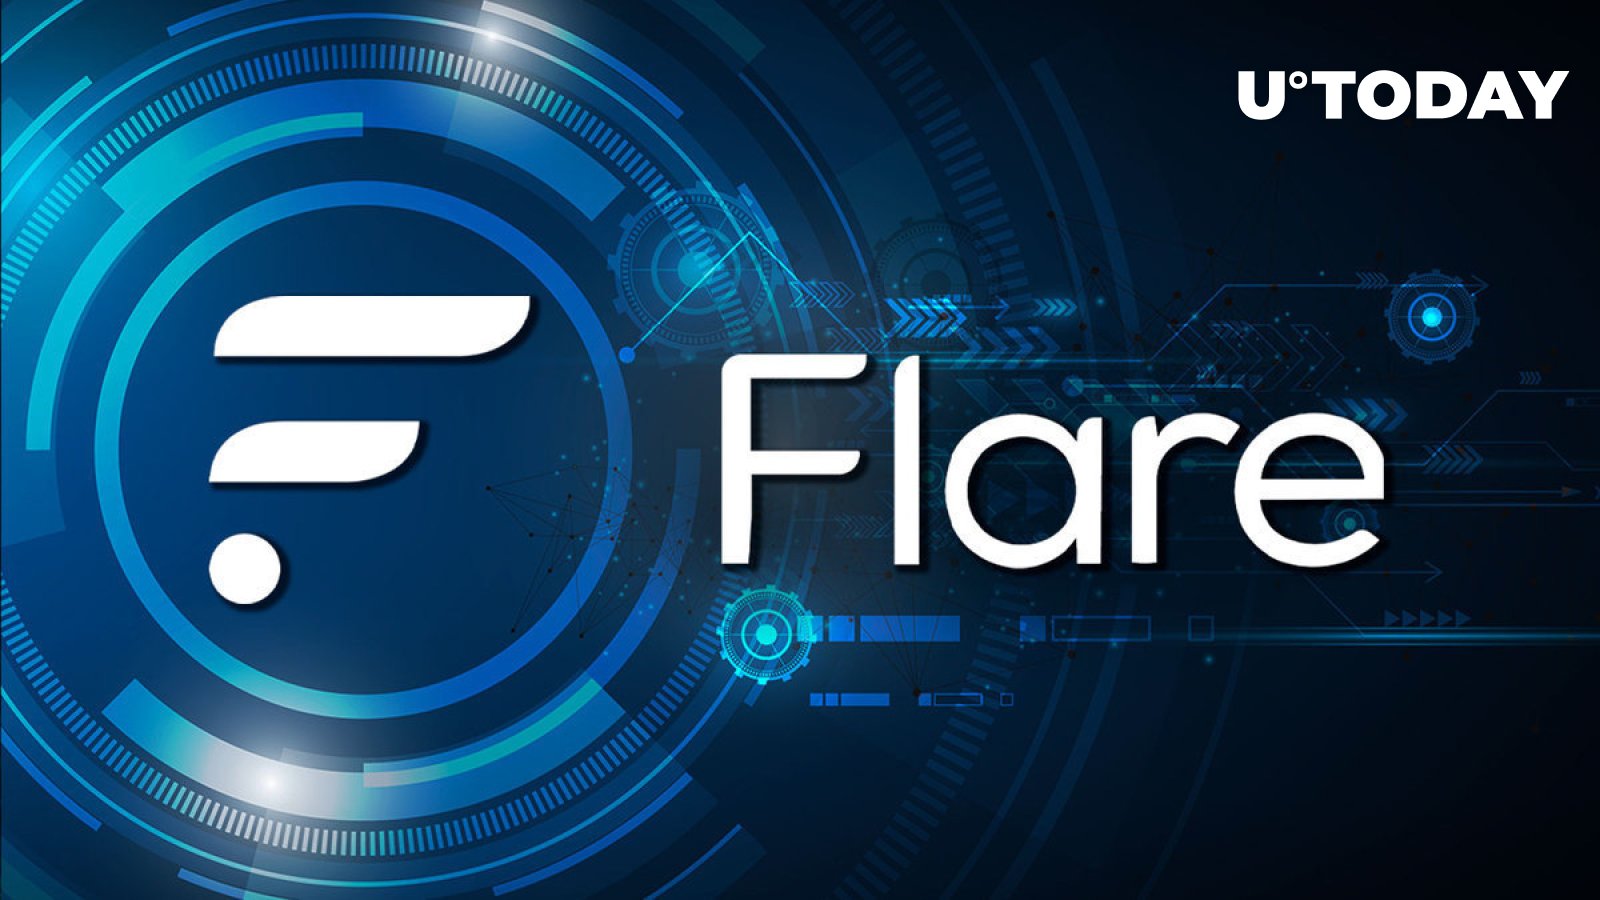 Ripple-Linked Flare (FLR) Becomes Only Top 100 Crypto With Double-Digit Gains